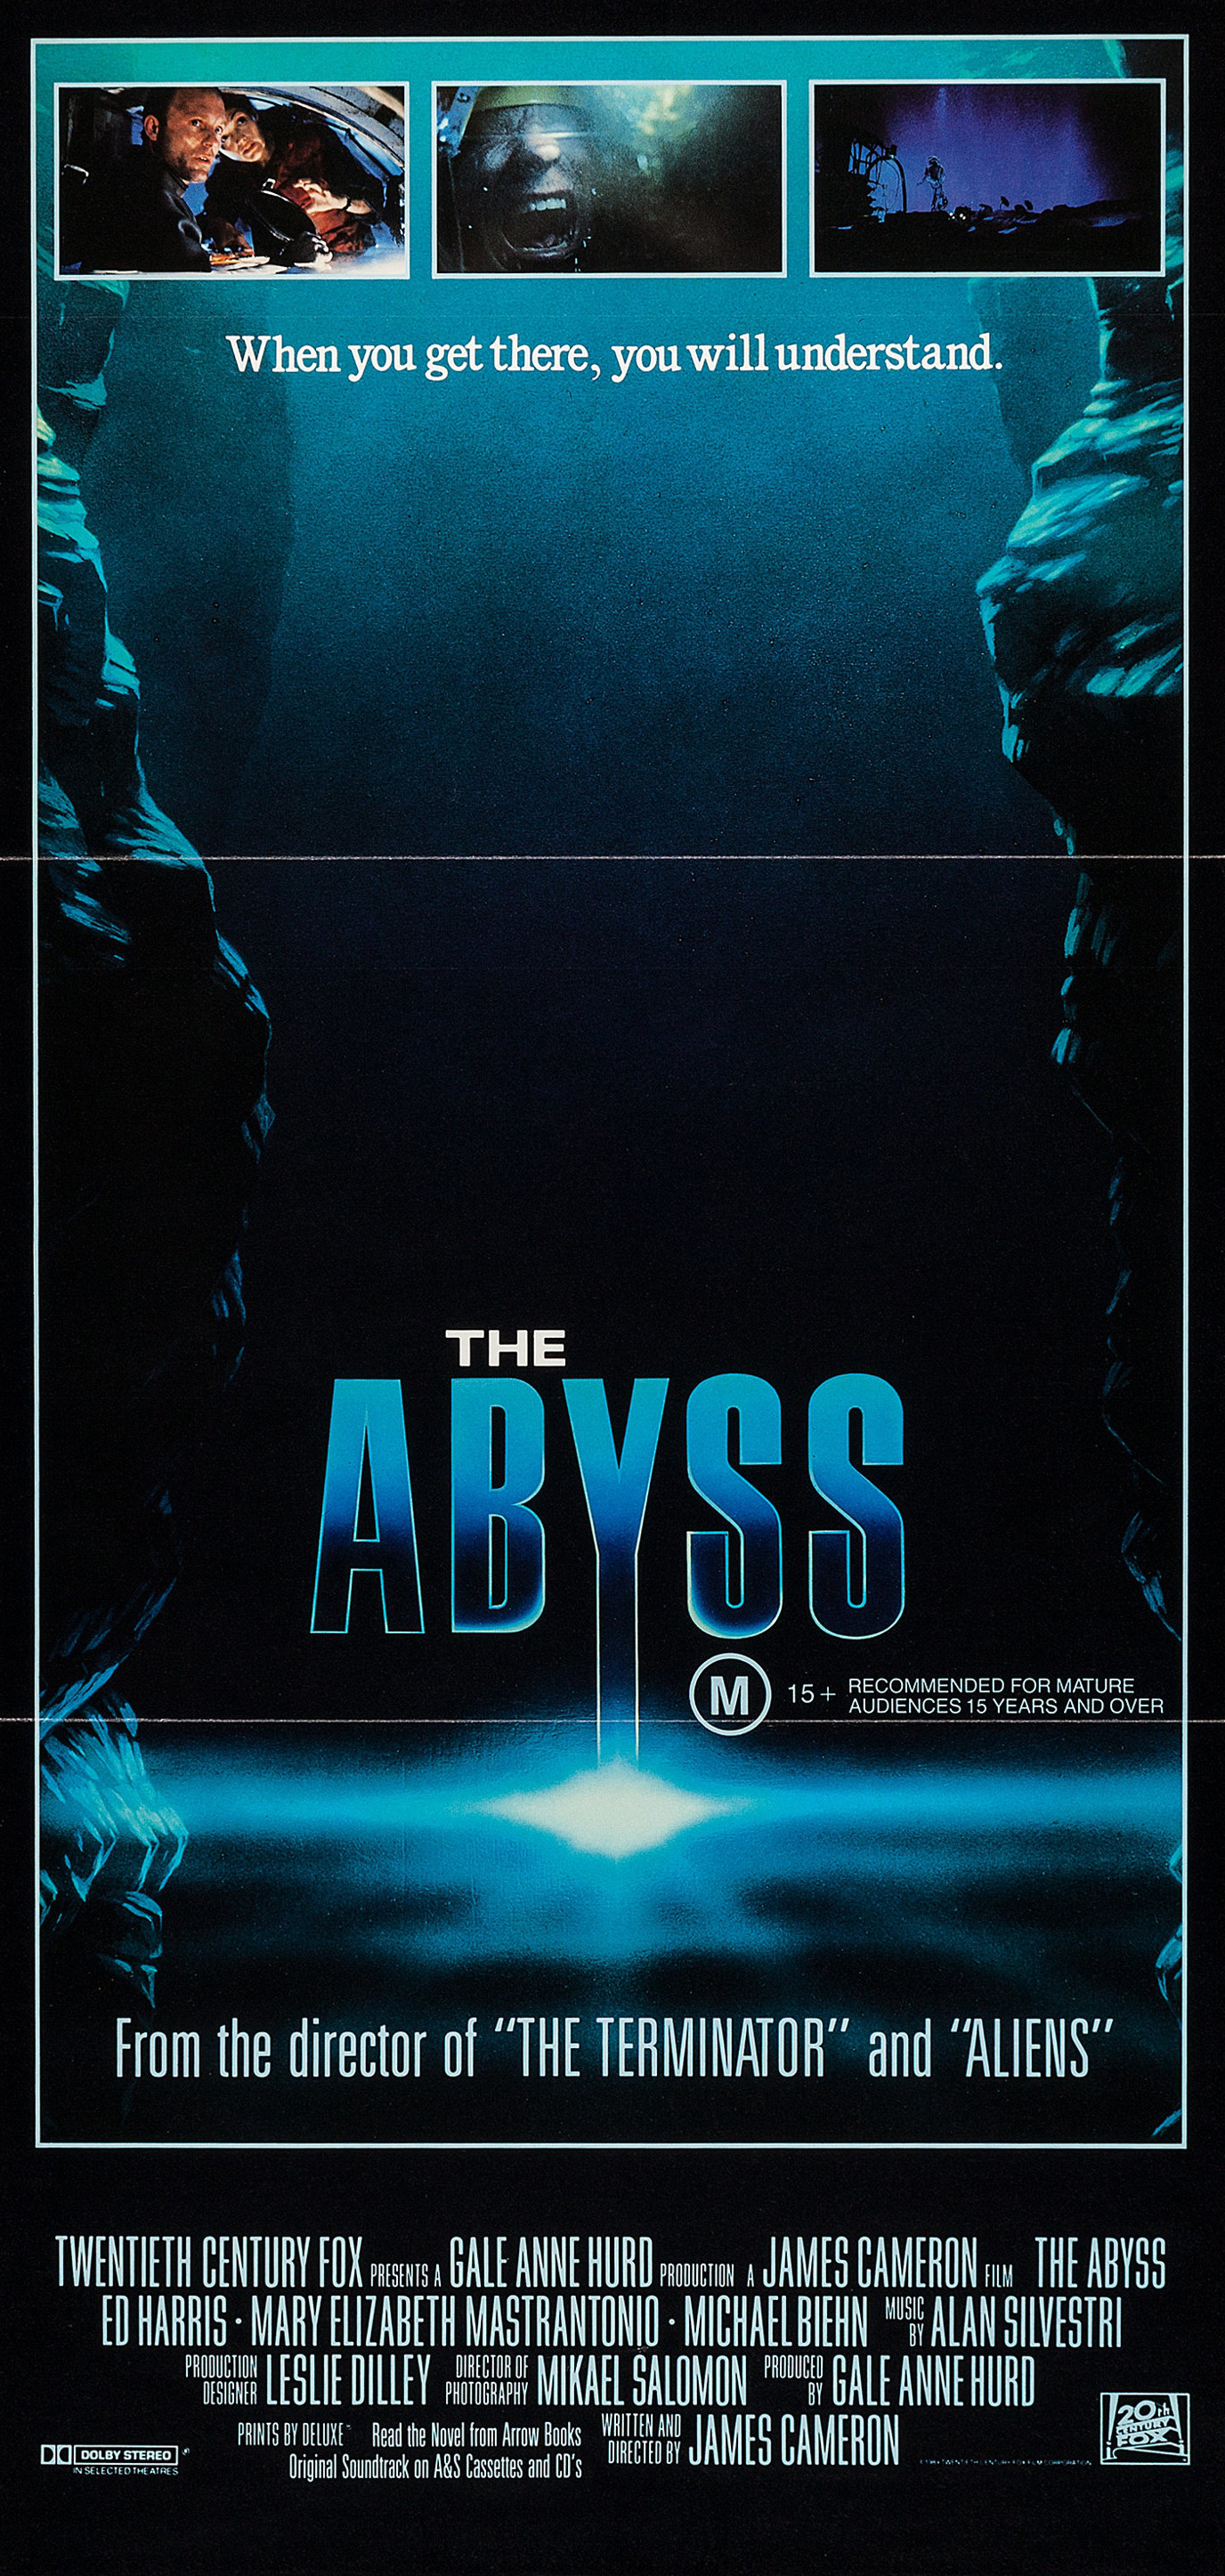 download the last version for ipod Return to Abyss